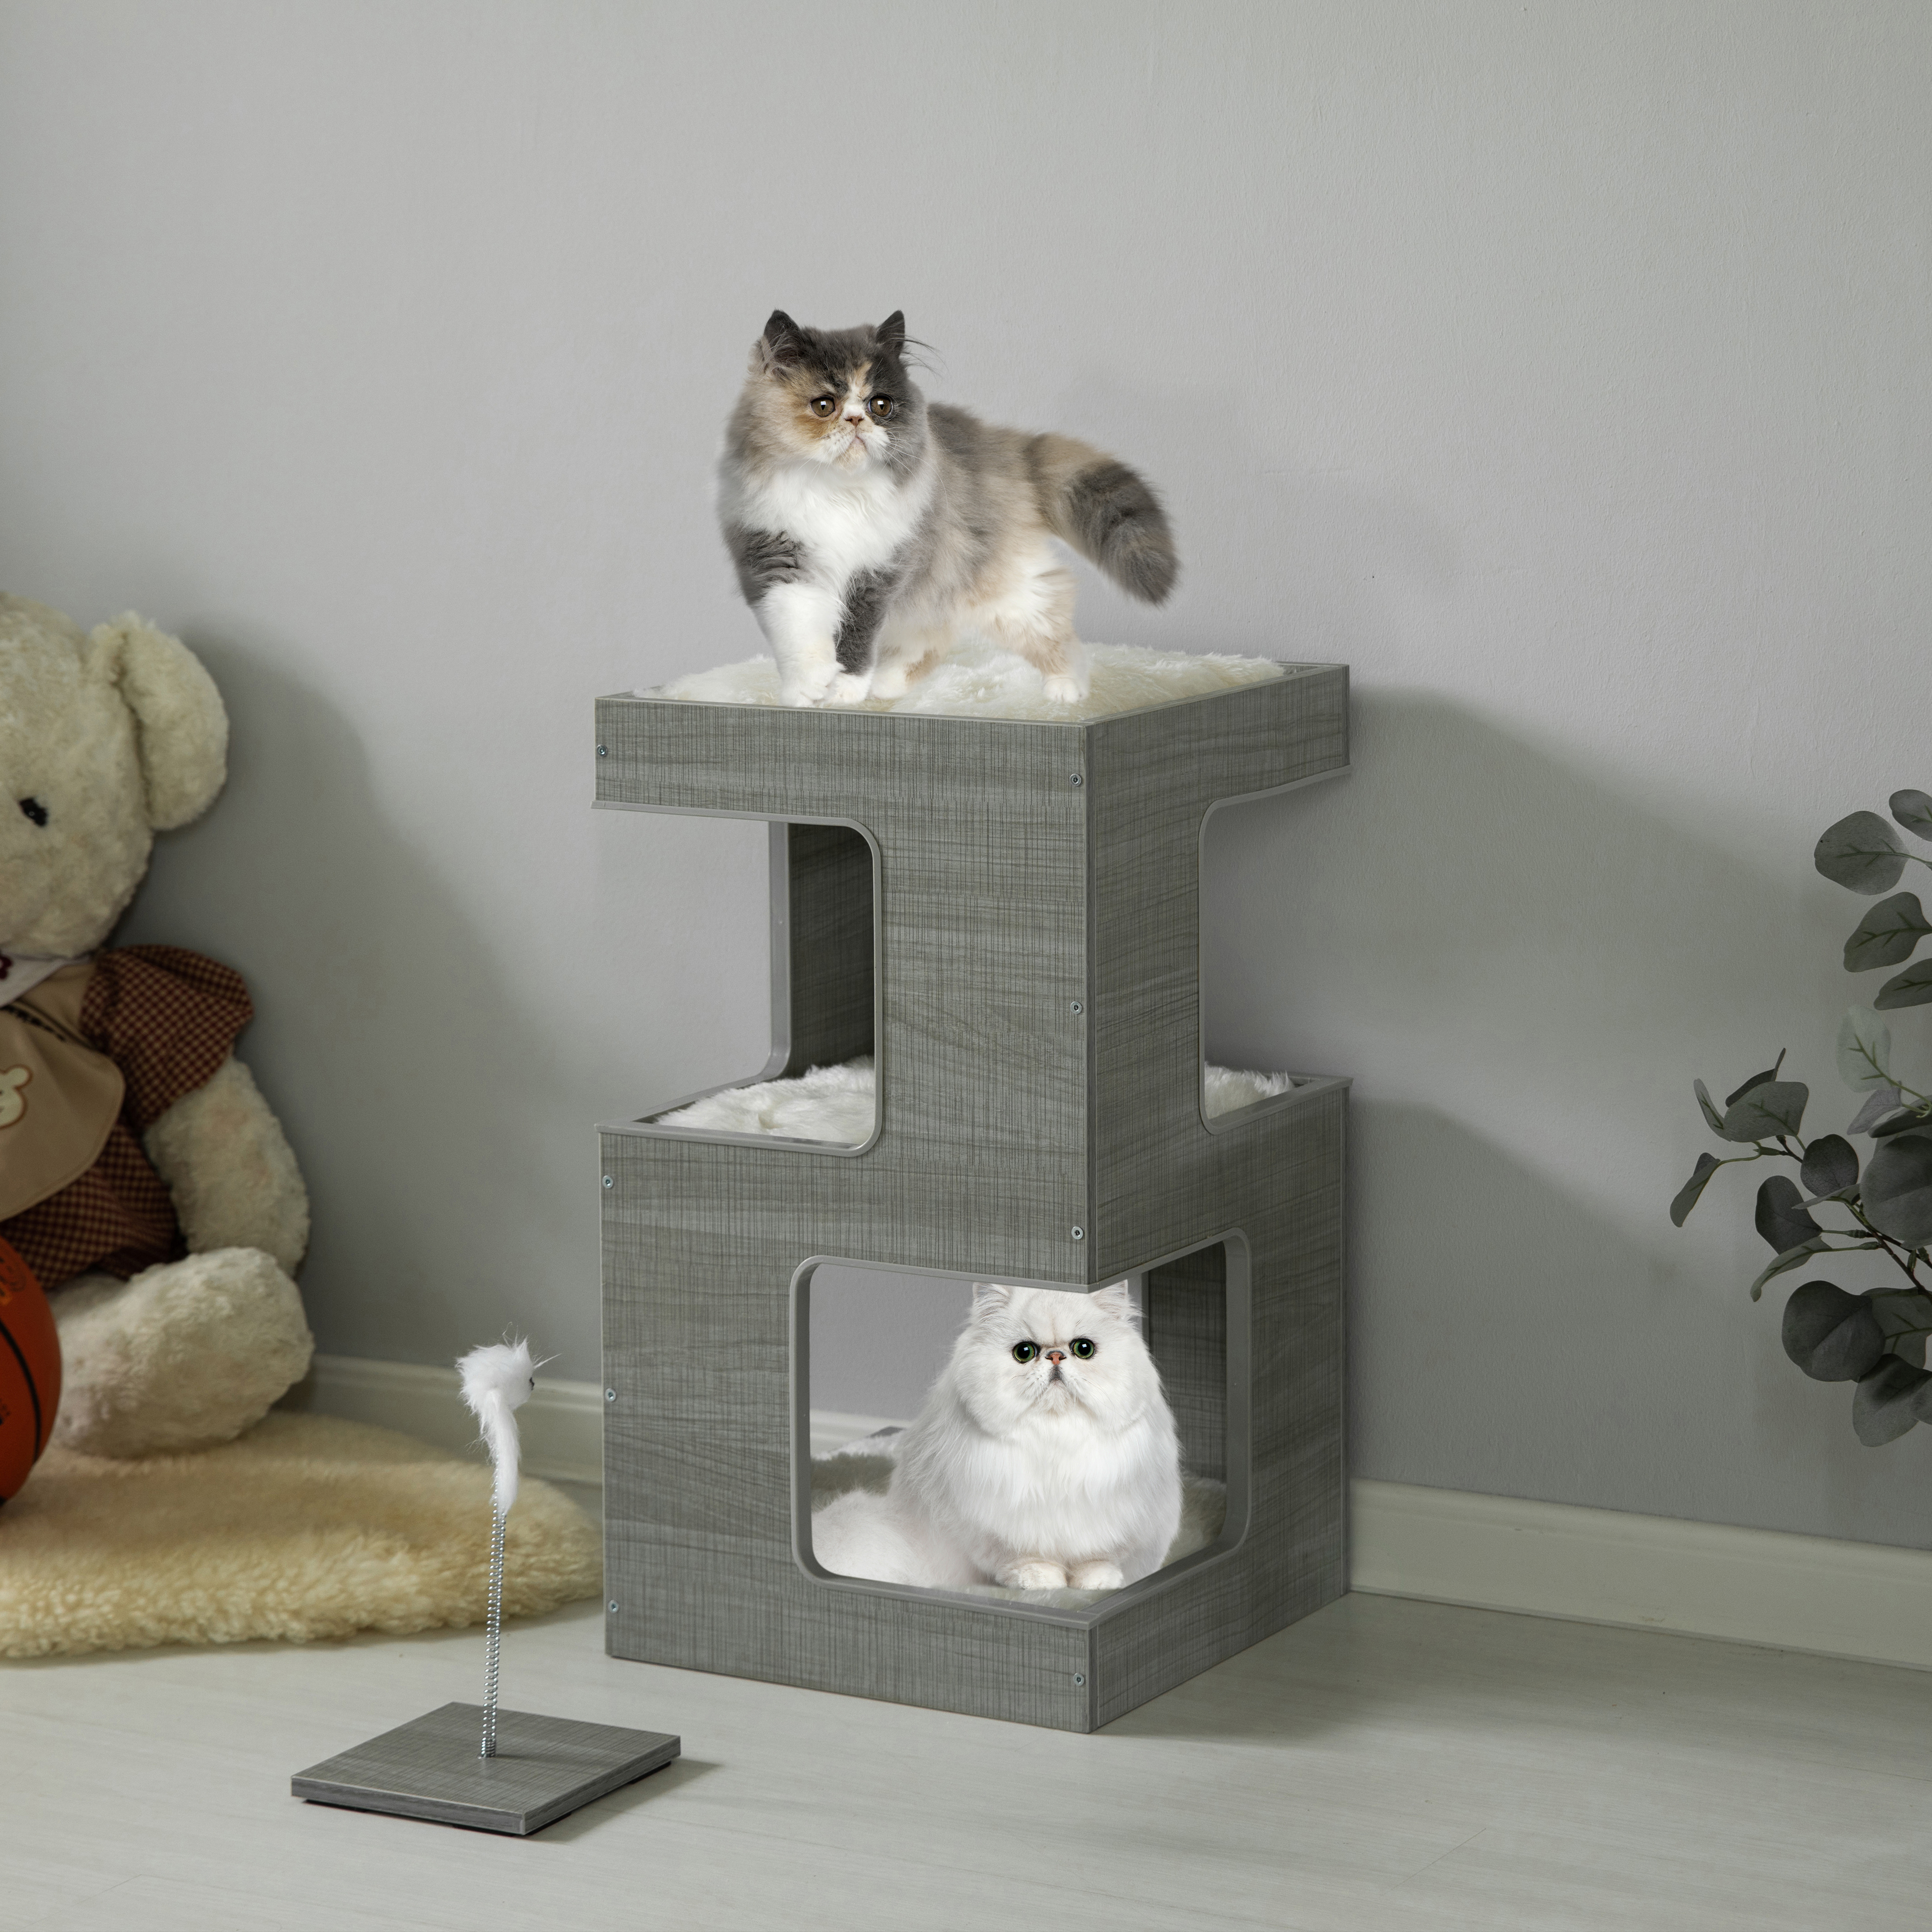 Multi Level Modern Cat Tall Climbing Tree House For Indoor Cats Spacious Wood Tower Luxury Furniture Stand With Removable Soft Blanket